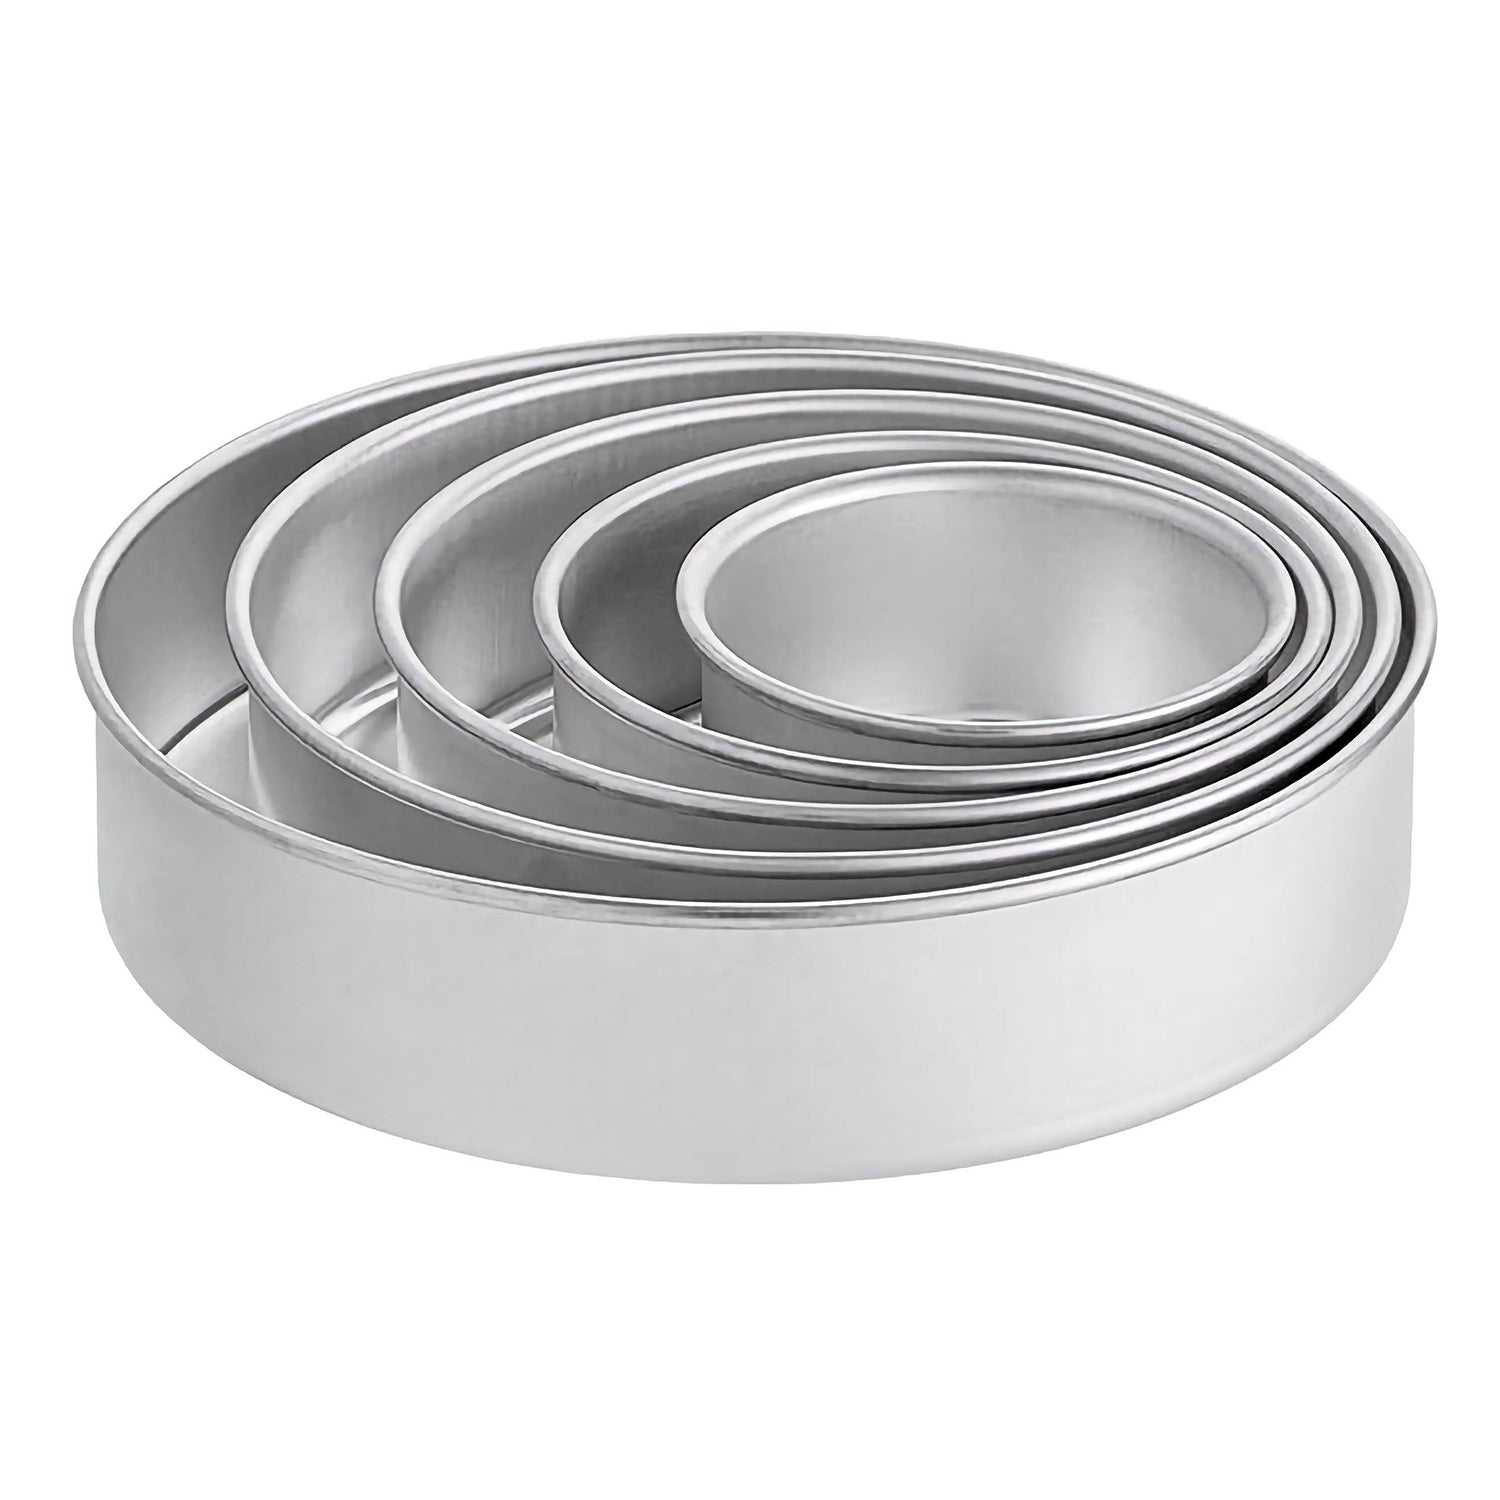 Set of four round 2 inch deep metal cake pans in varying sizes, stacked together. Ideal for baking layered cakes.